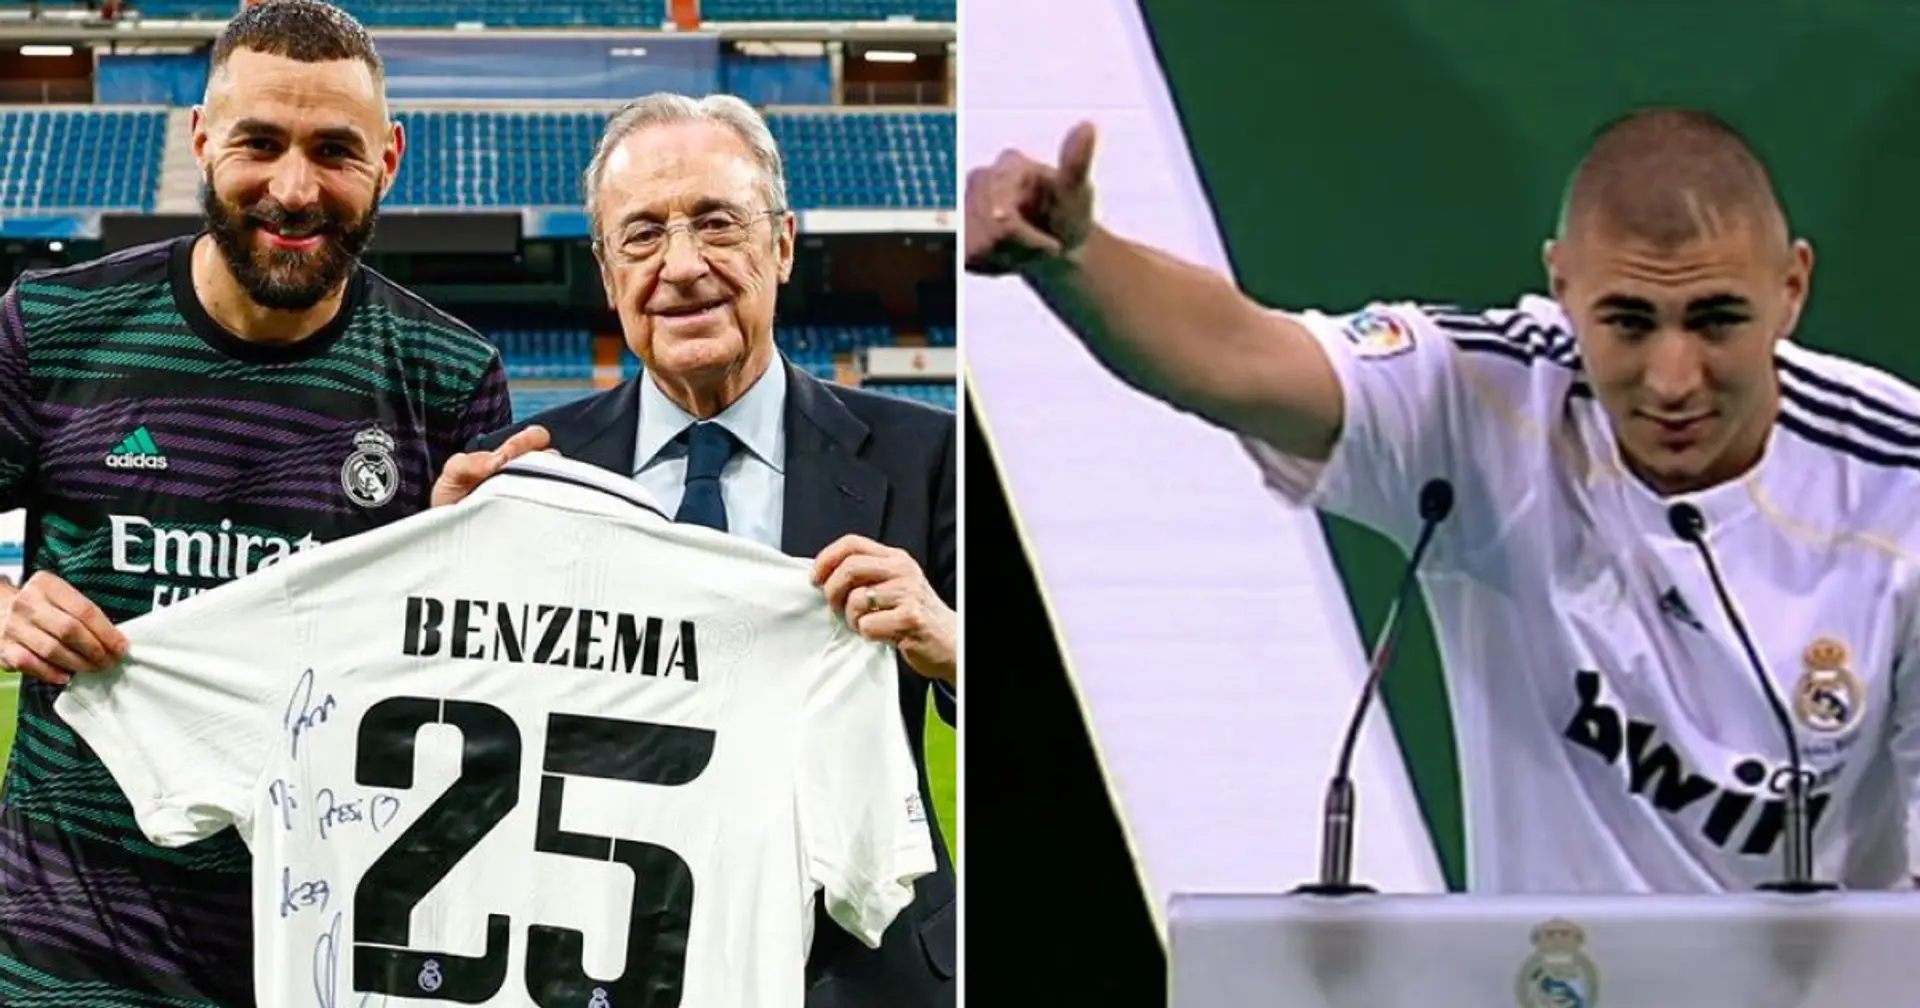 'For my president': Meaning behind Benzema's farewell gift to Perez explained